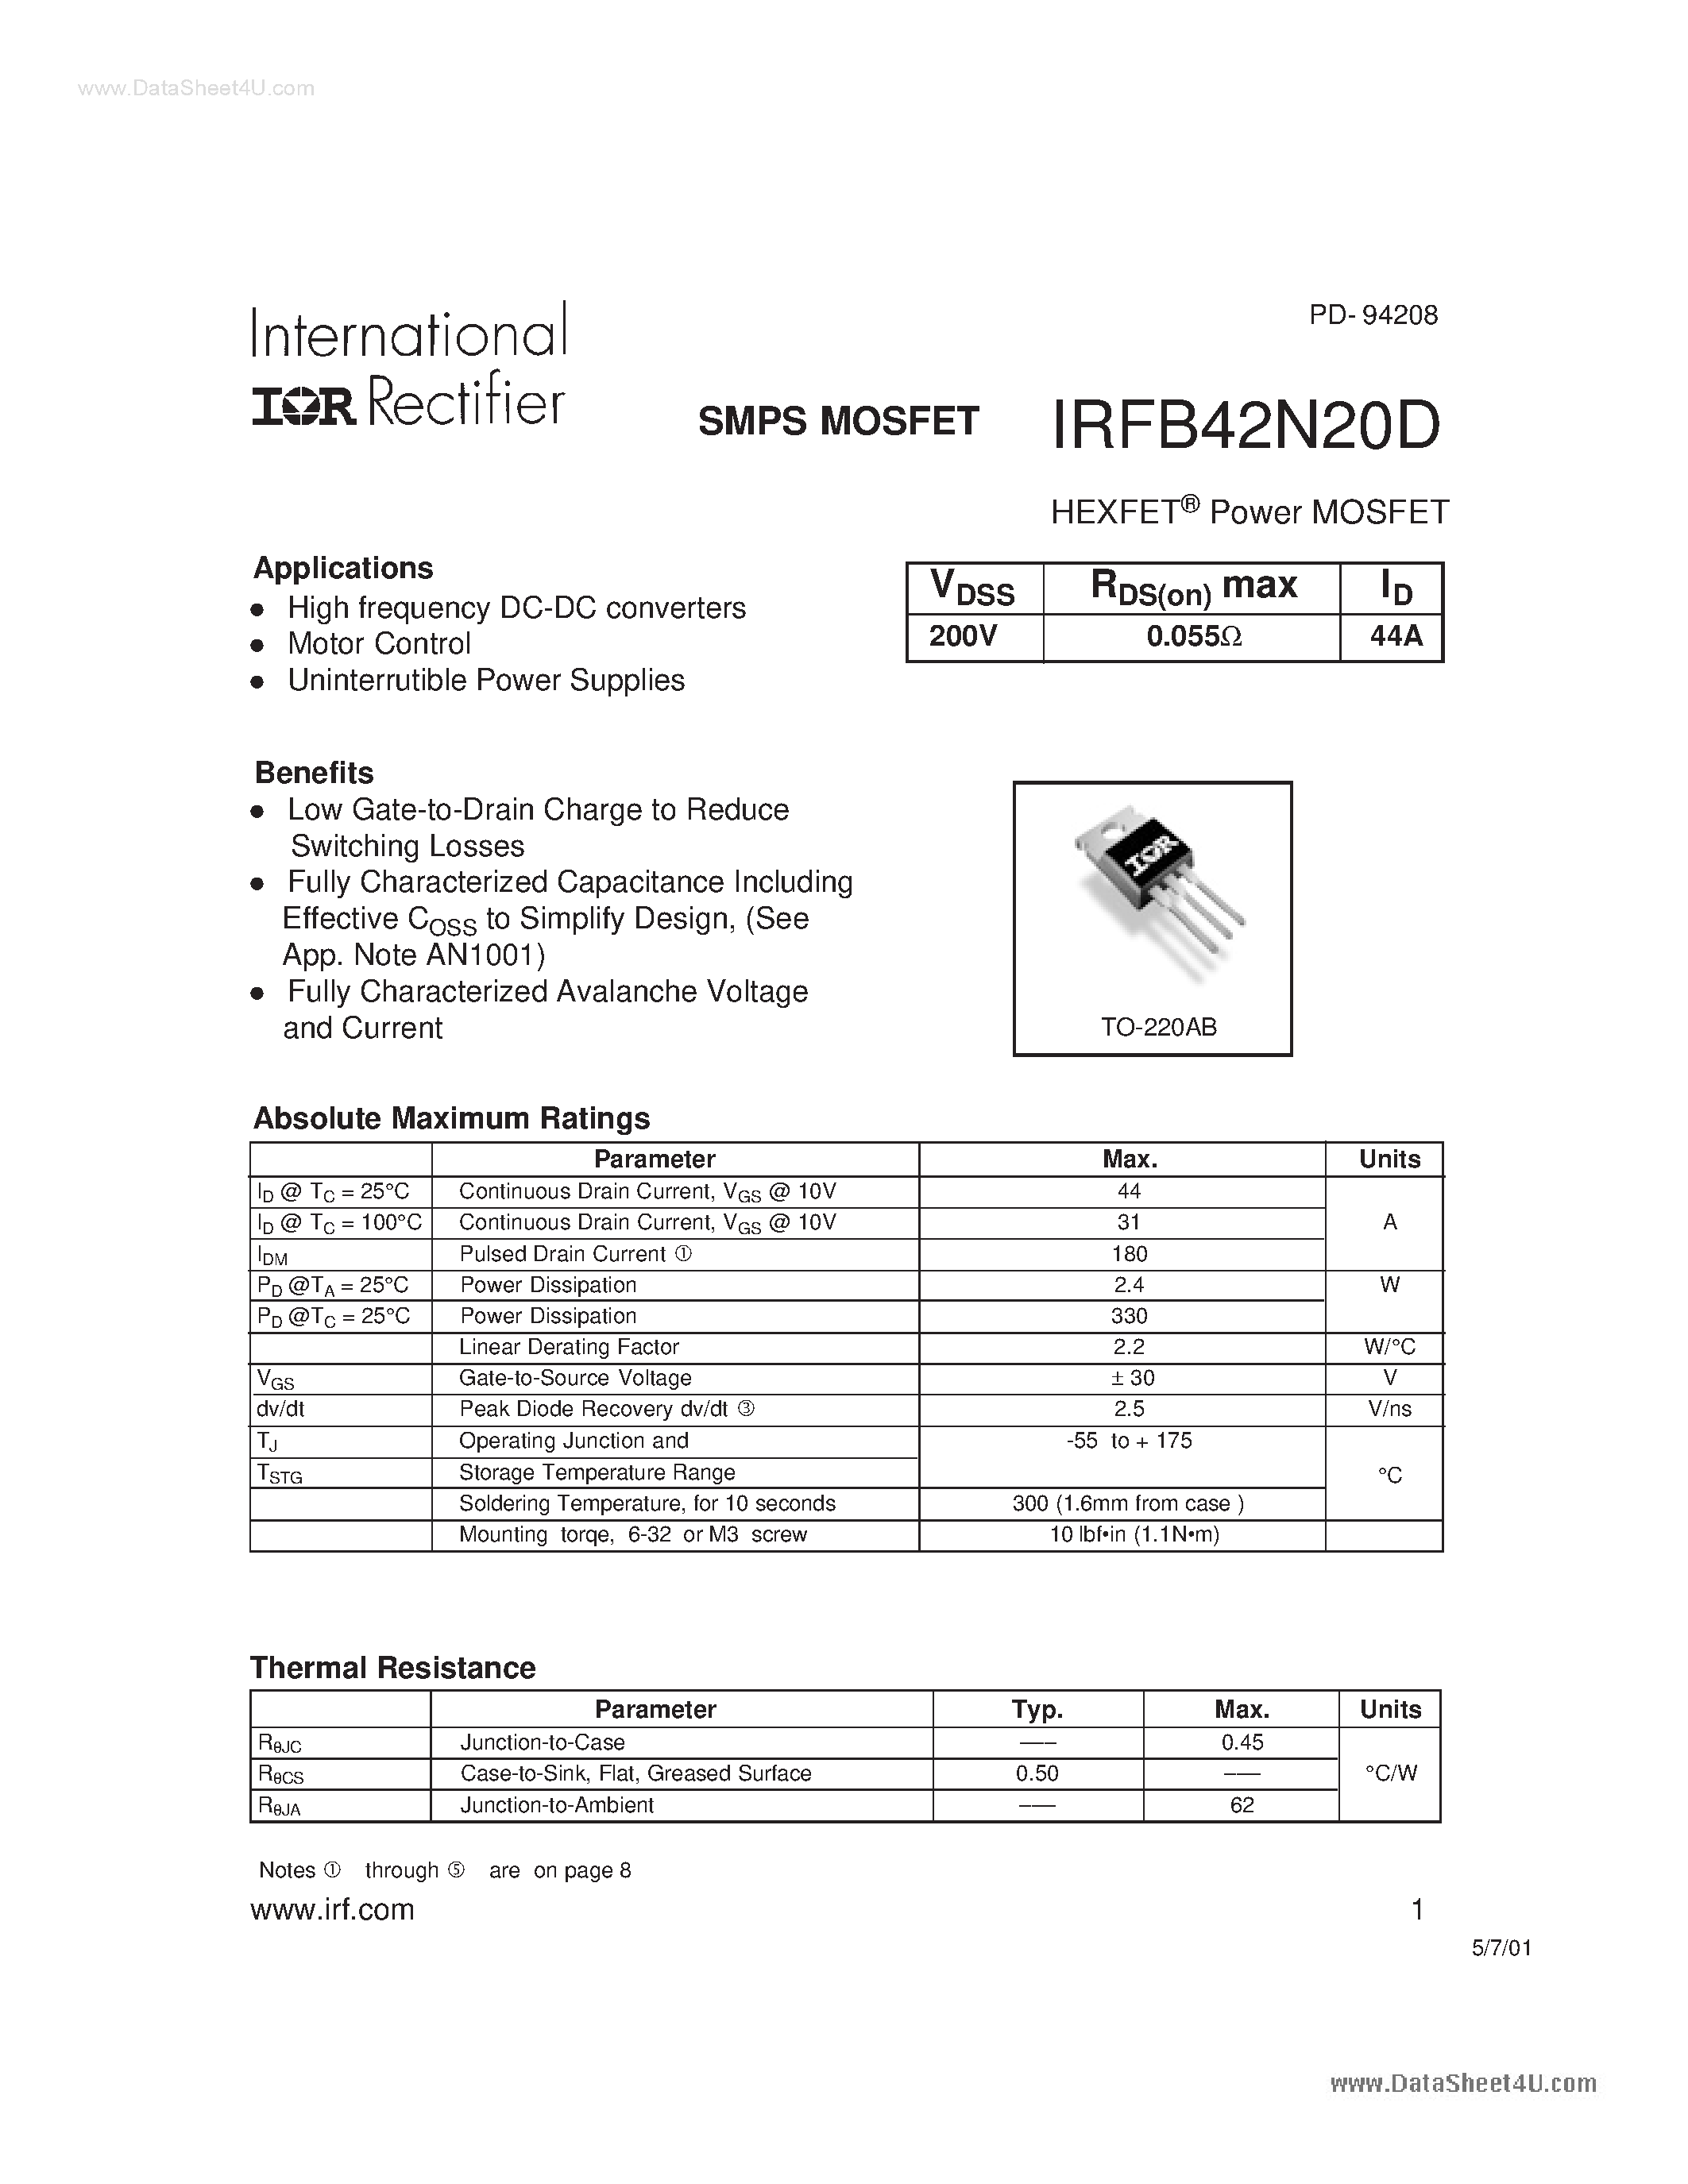 Datasheet FB42N20D - Search -----> IRFB42N20D page 1